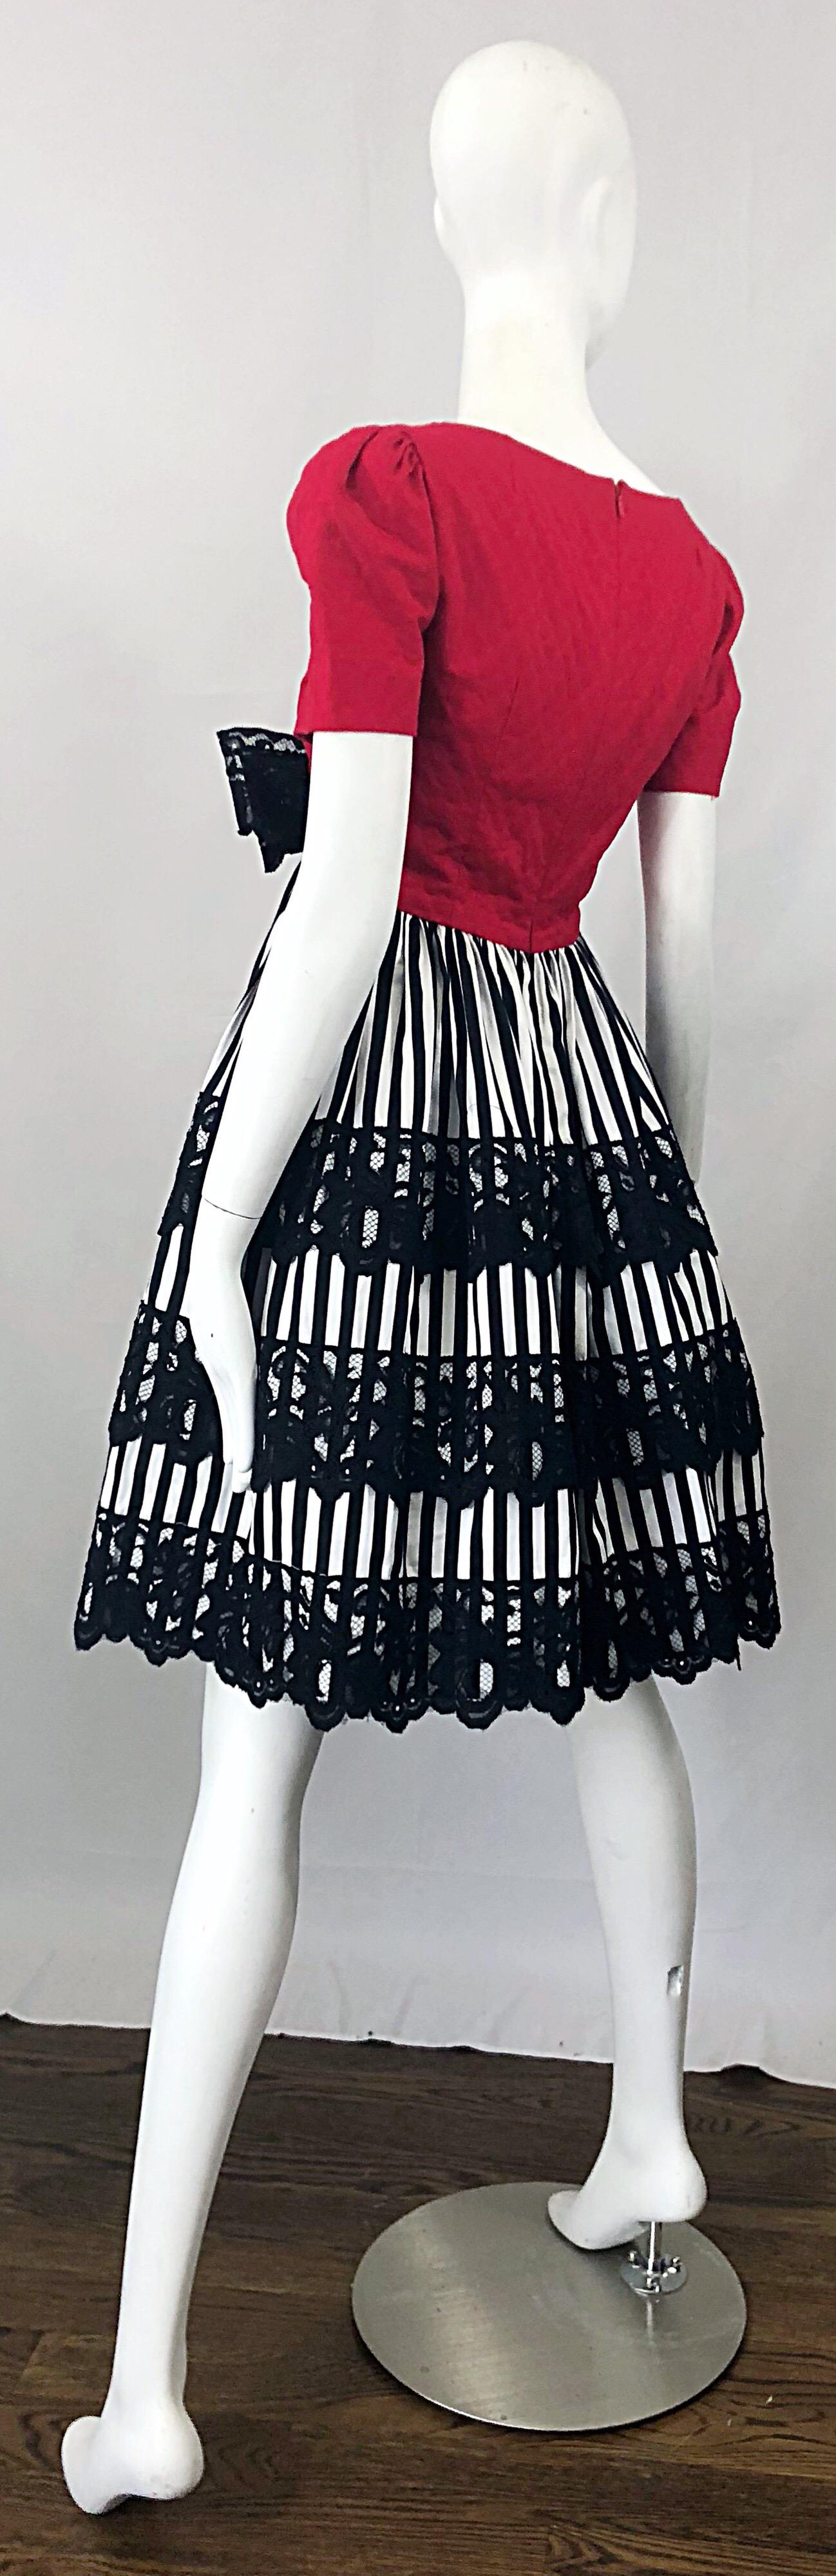 Vintage Adele Simpson 1980s Red Black White Fit n' Flare Empire Bow Lace Dress For Sale 6